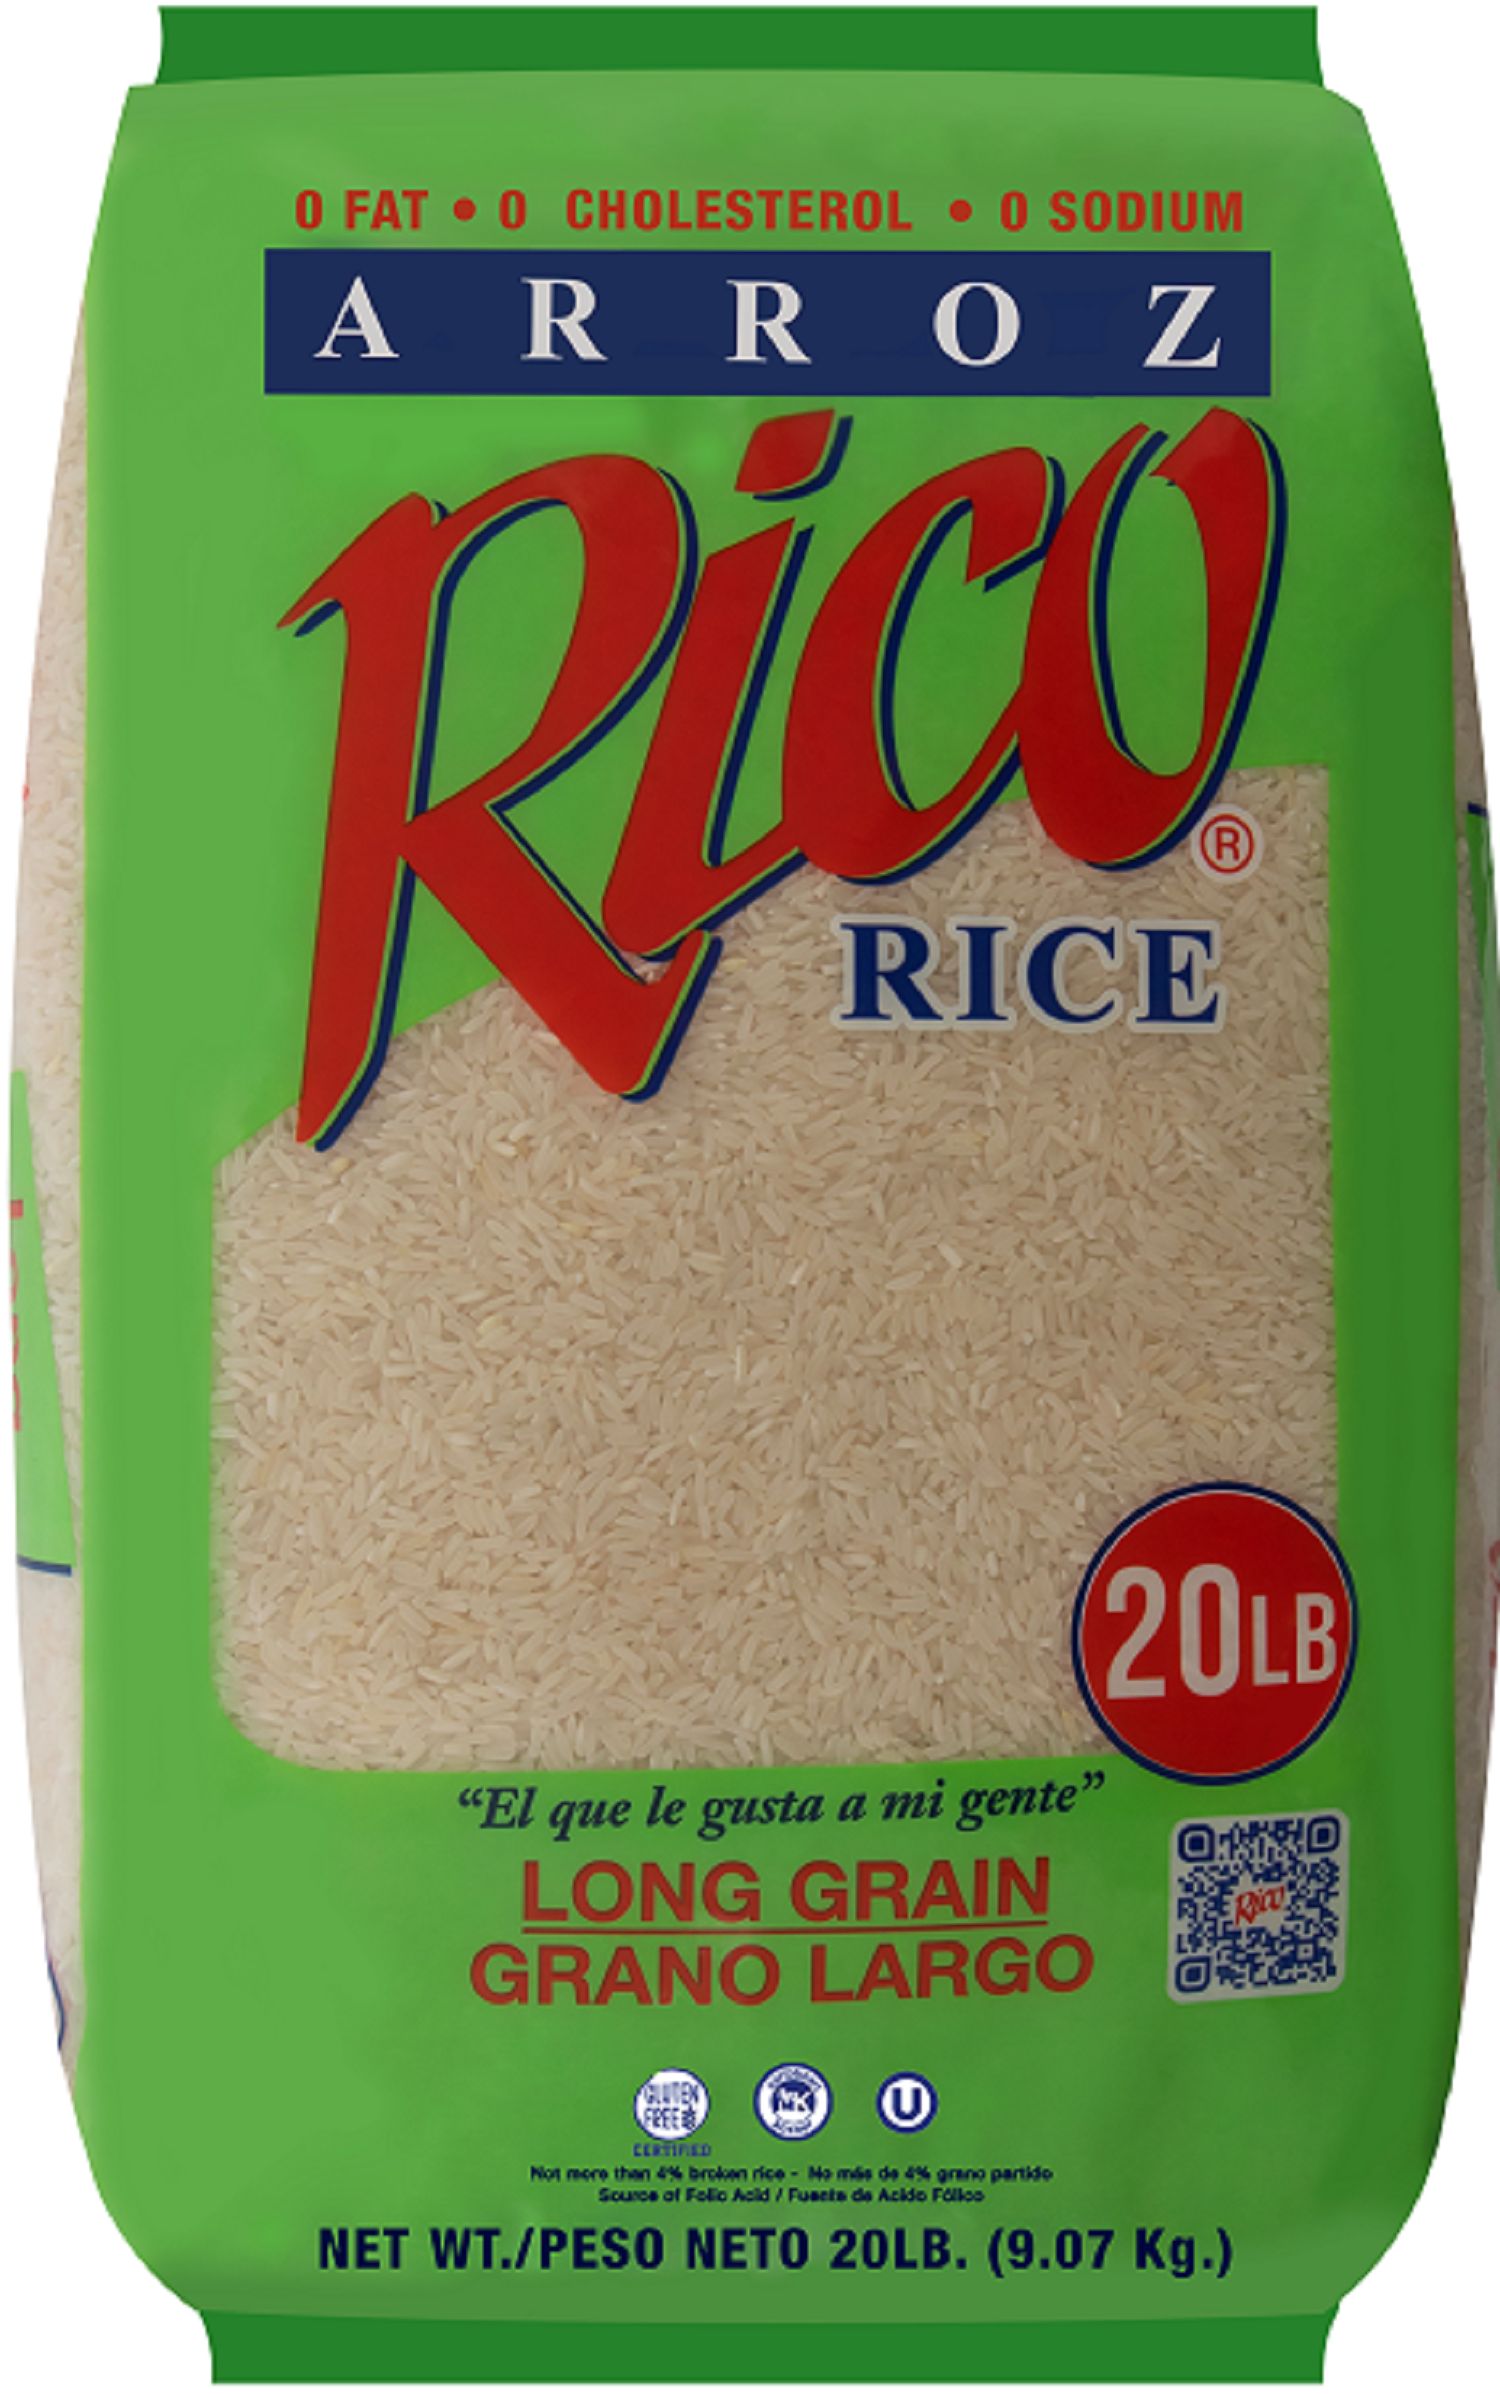 Rico Long Grain Rice, 20 lb Made in Puerto Rico Gluten Free - image 1 of 3